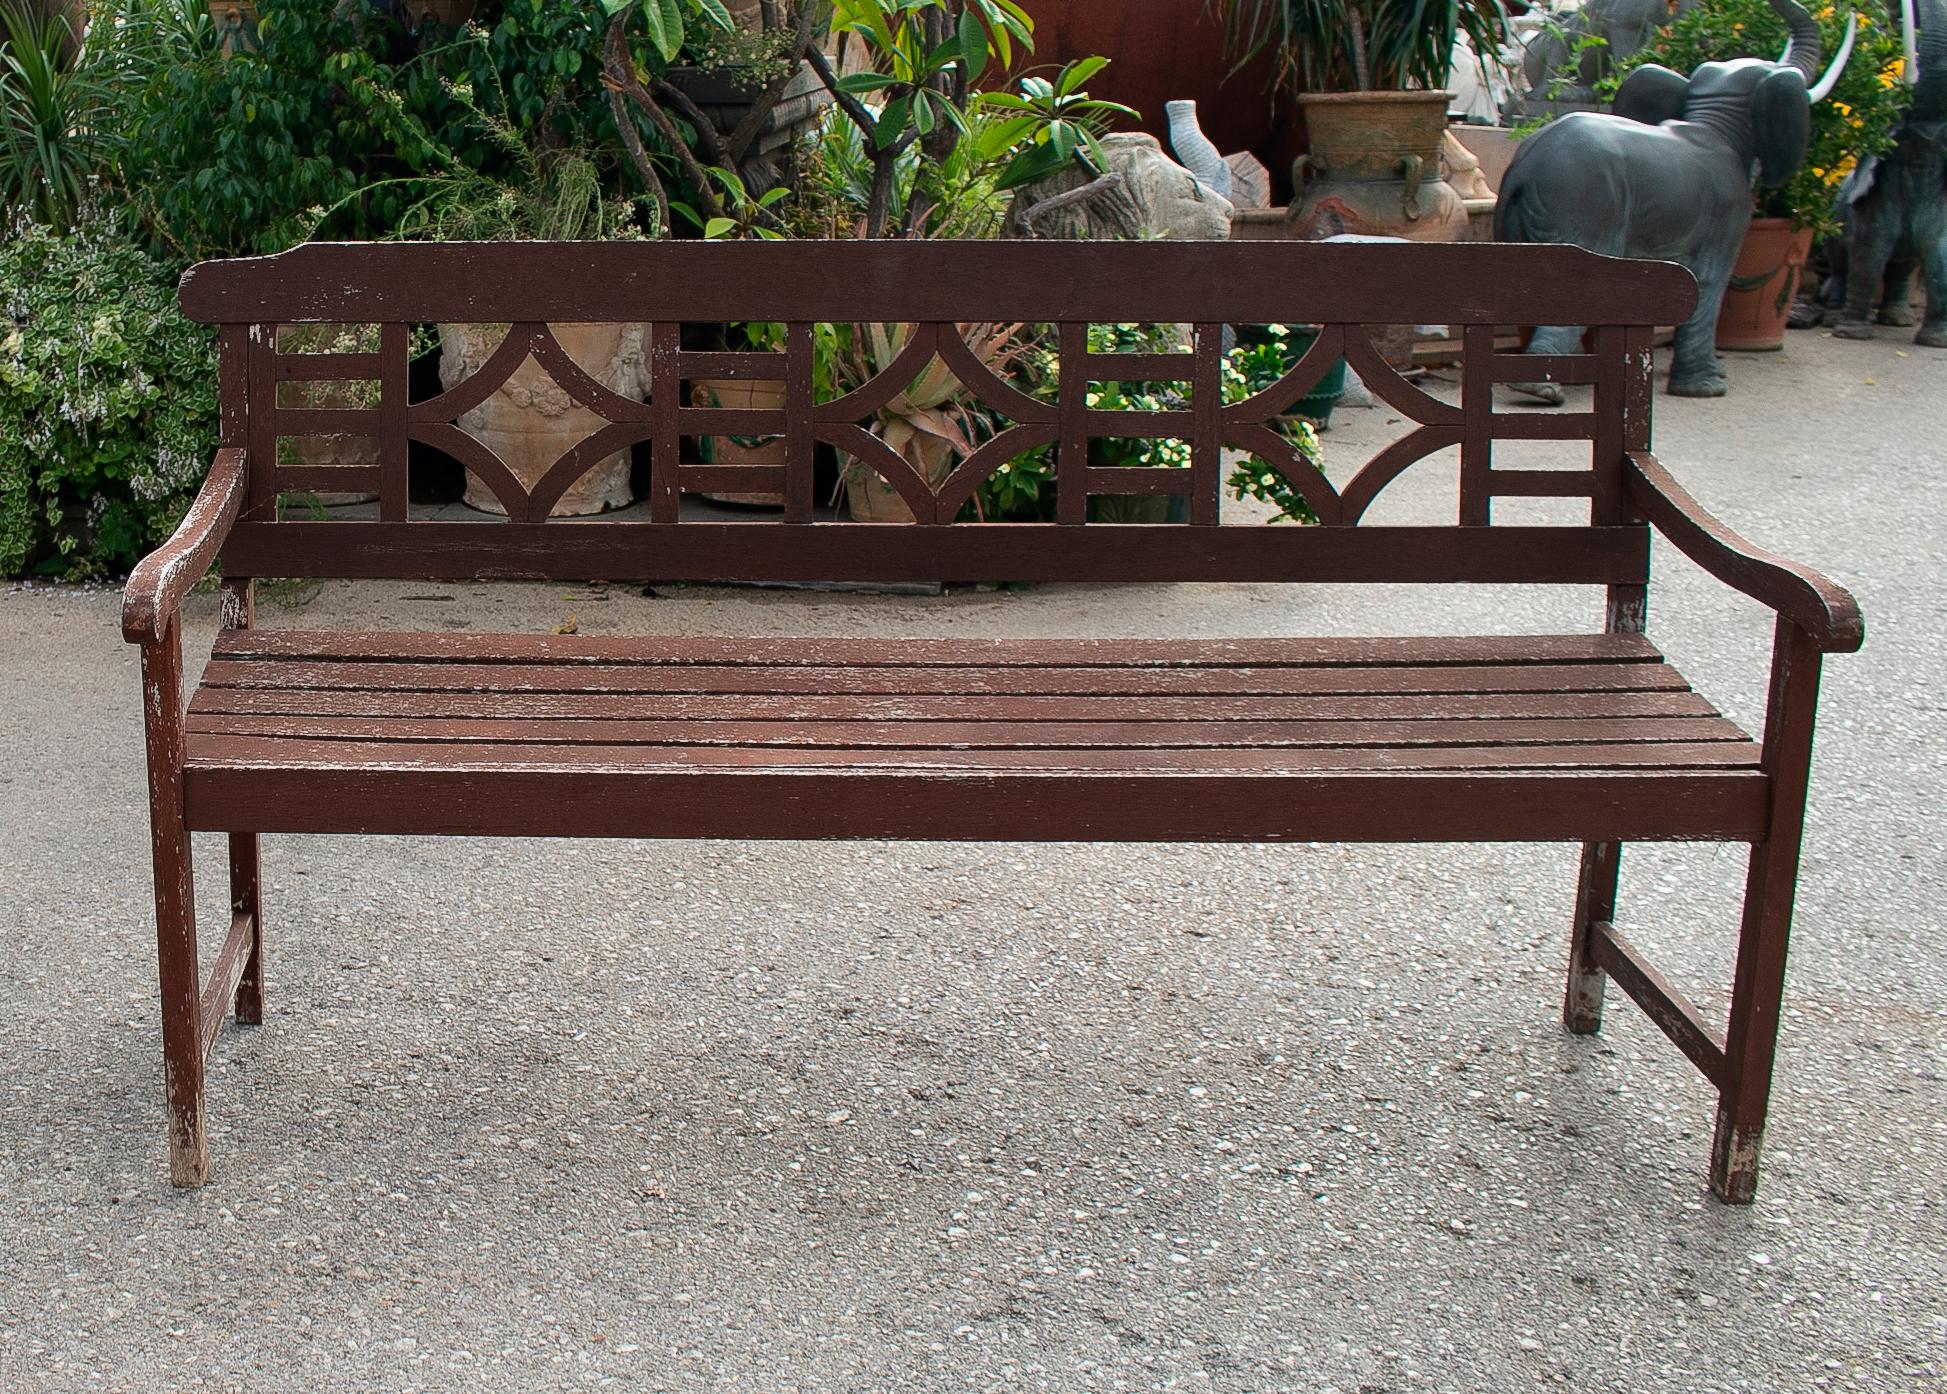 1990s Spanish set of wooden garden bench and two chairs.

Measures: Bench: 90 x 170 x 65cm 
Chairs: 90 x 59 x 60cm

